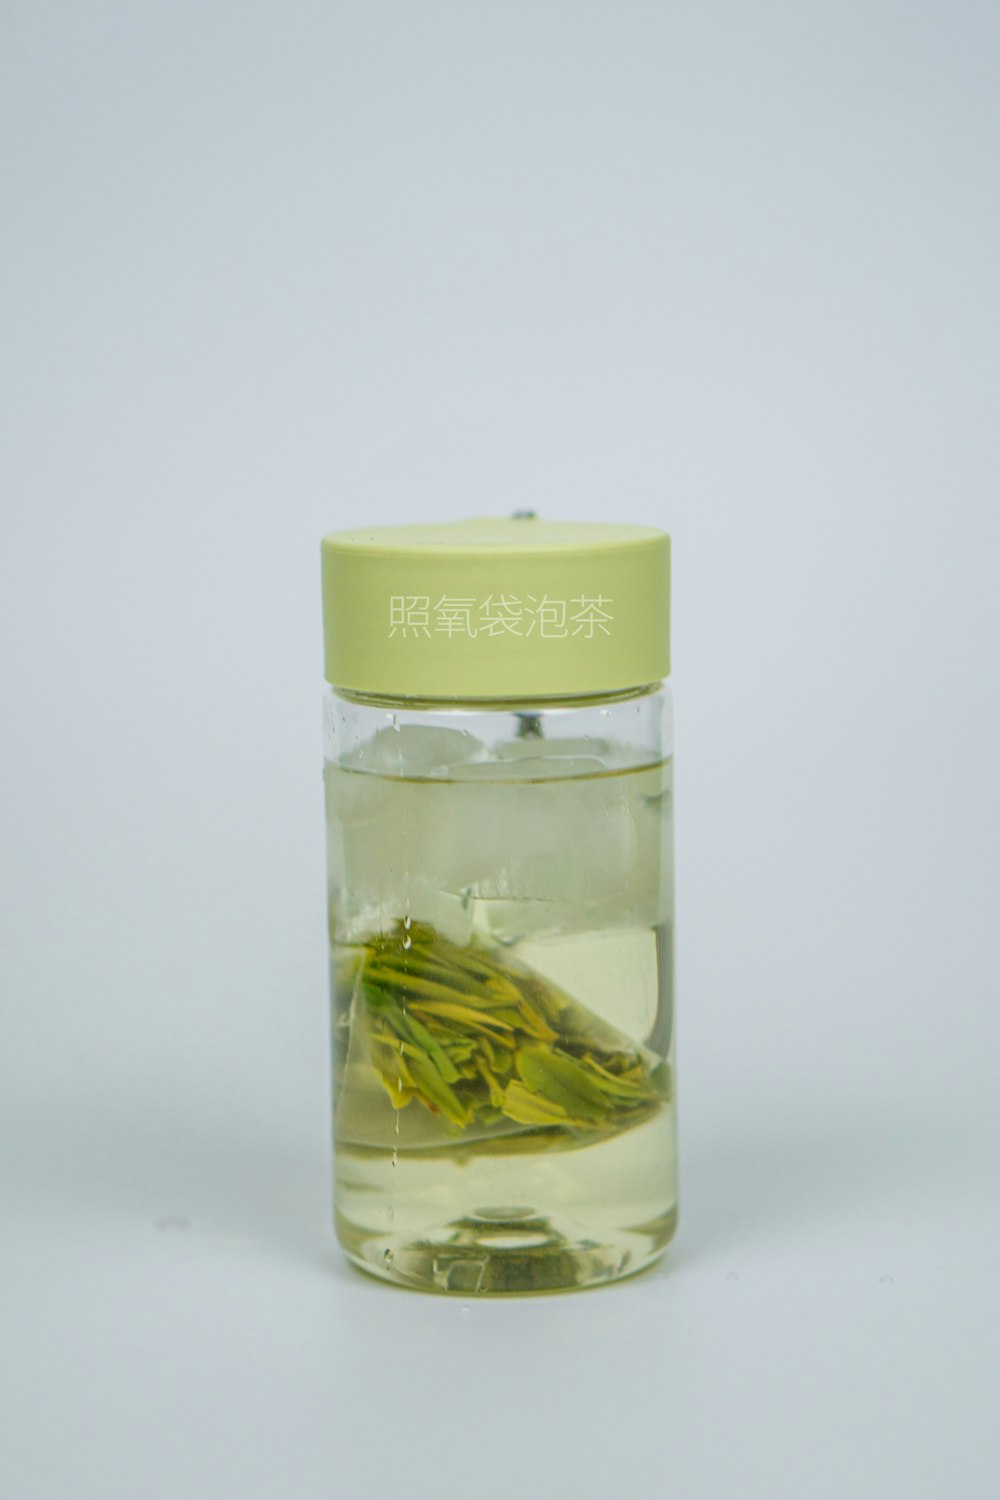 a glass jar with a yellow substance